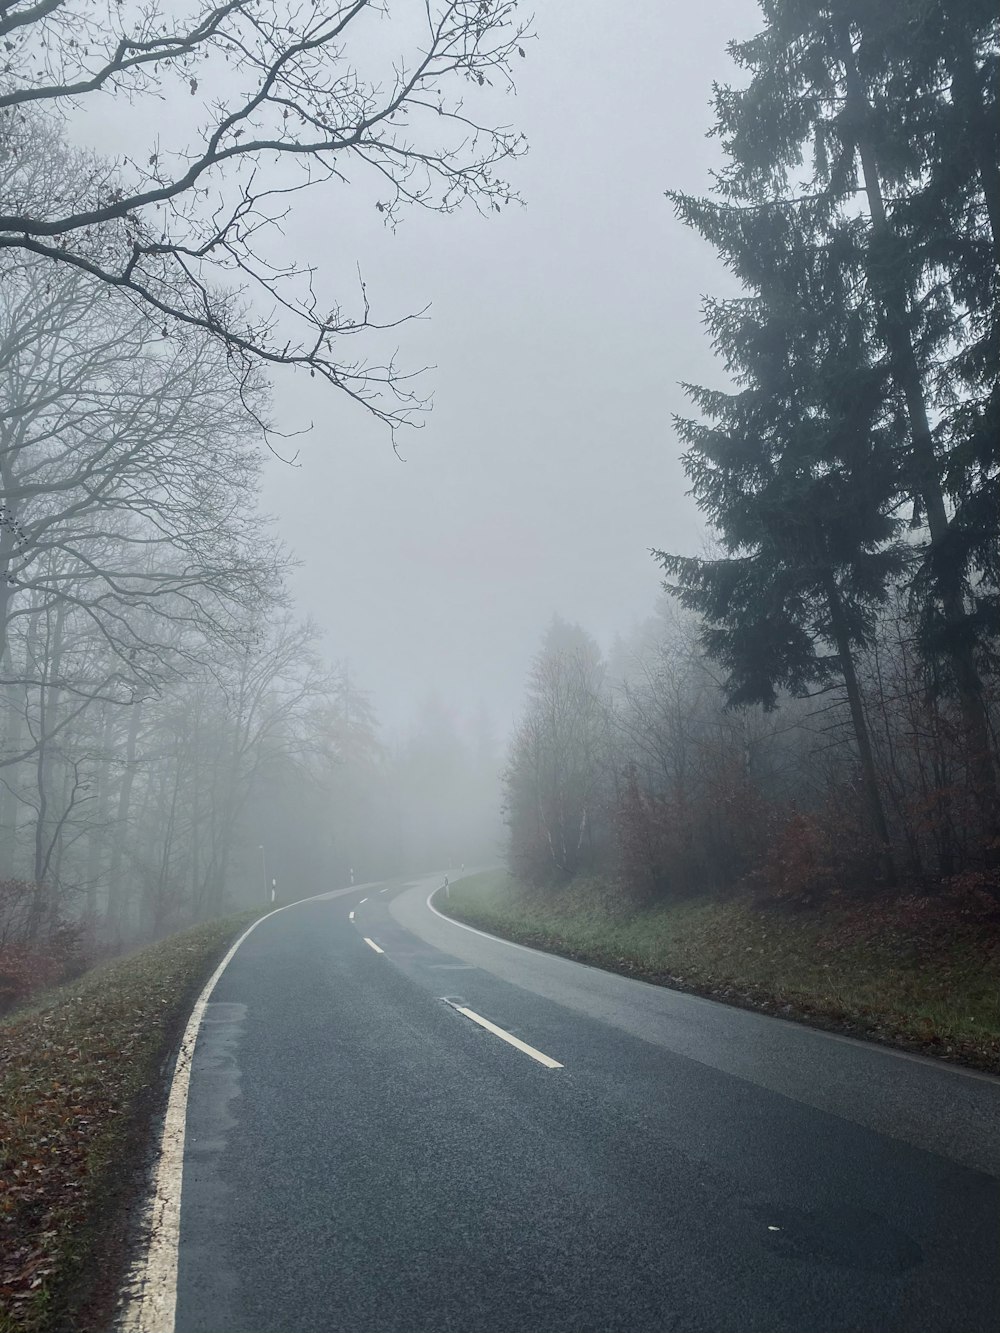 gray asphalt road between bare trees during foggy day